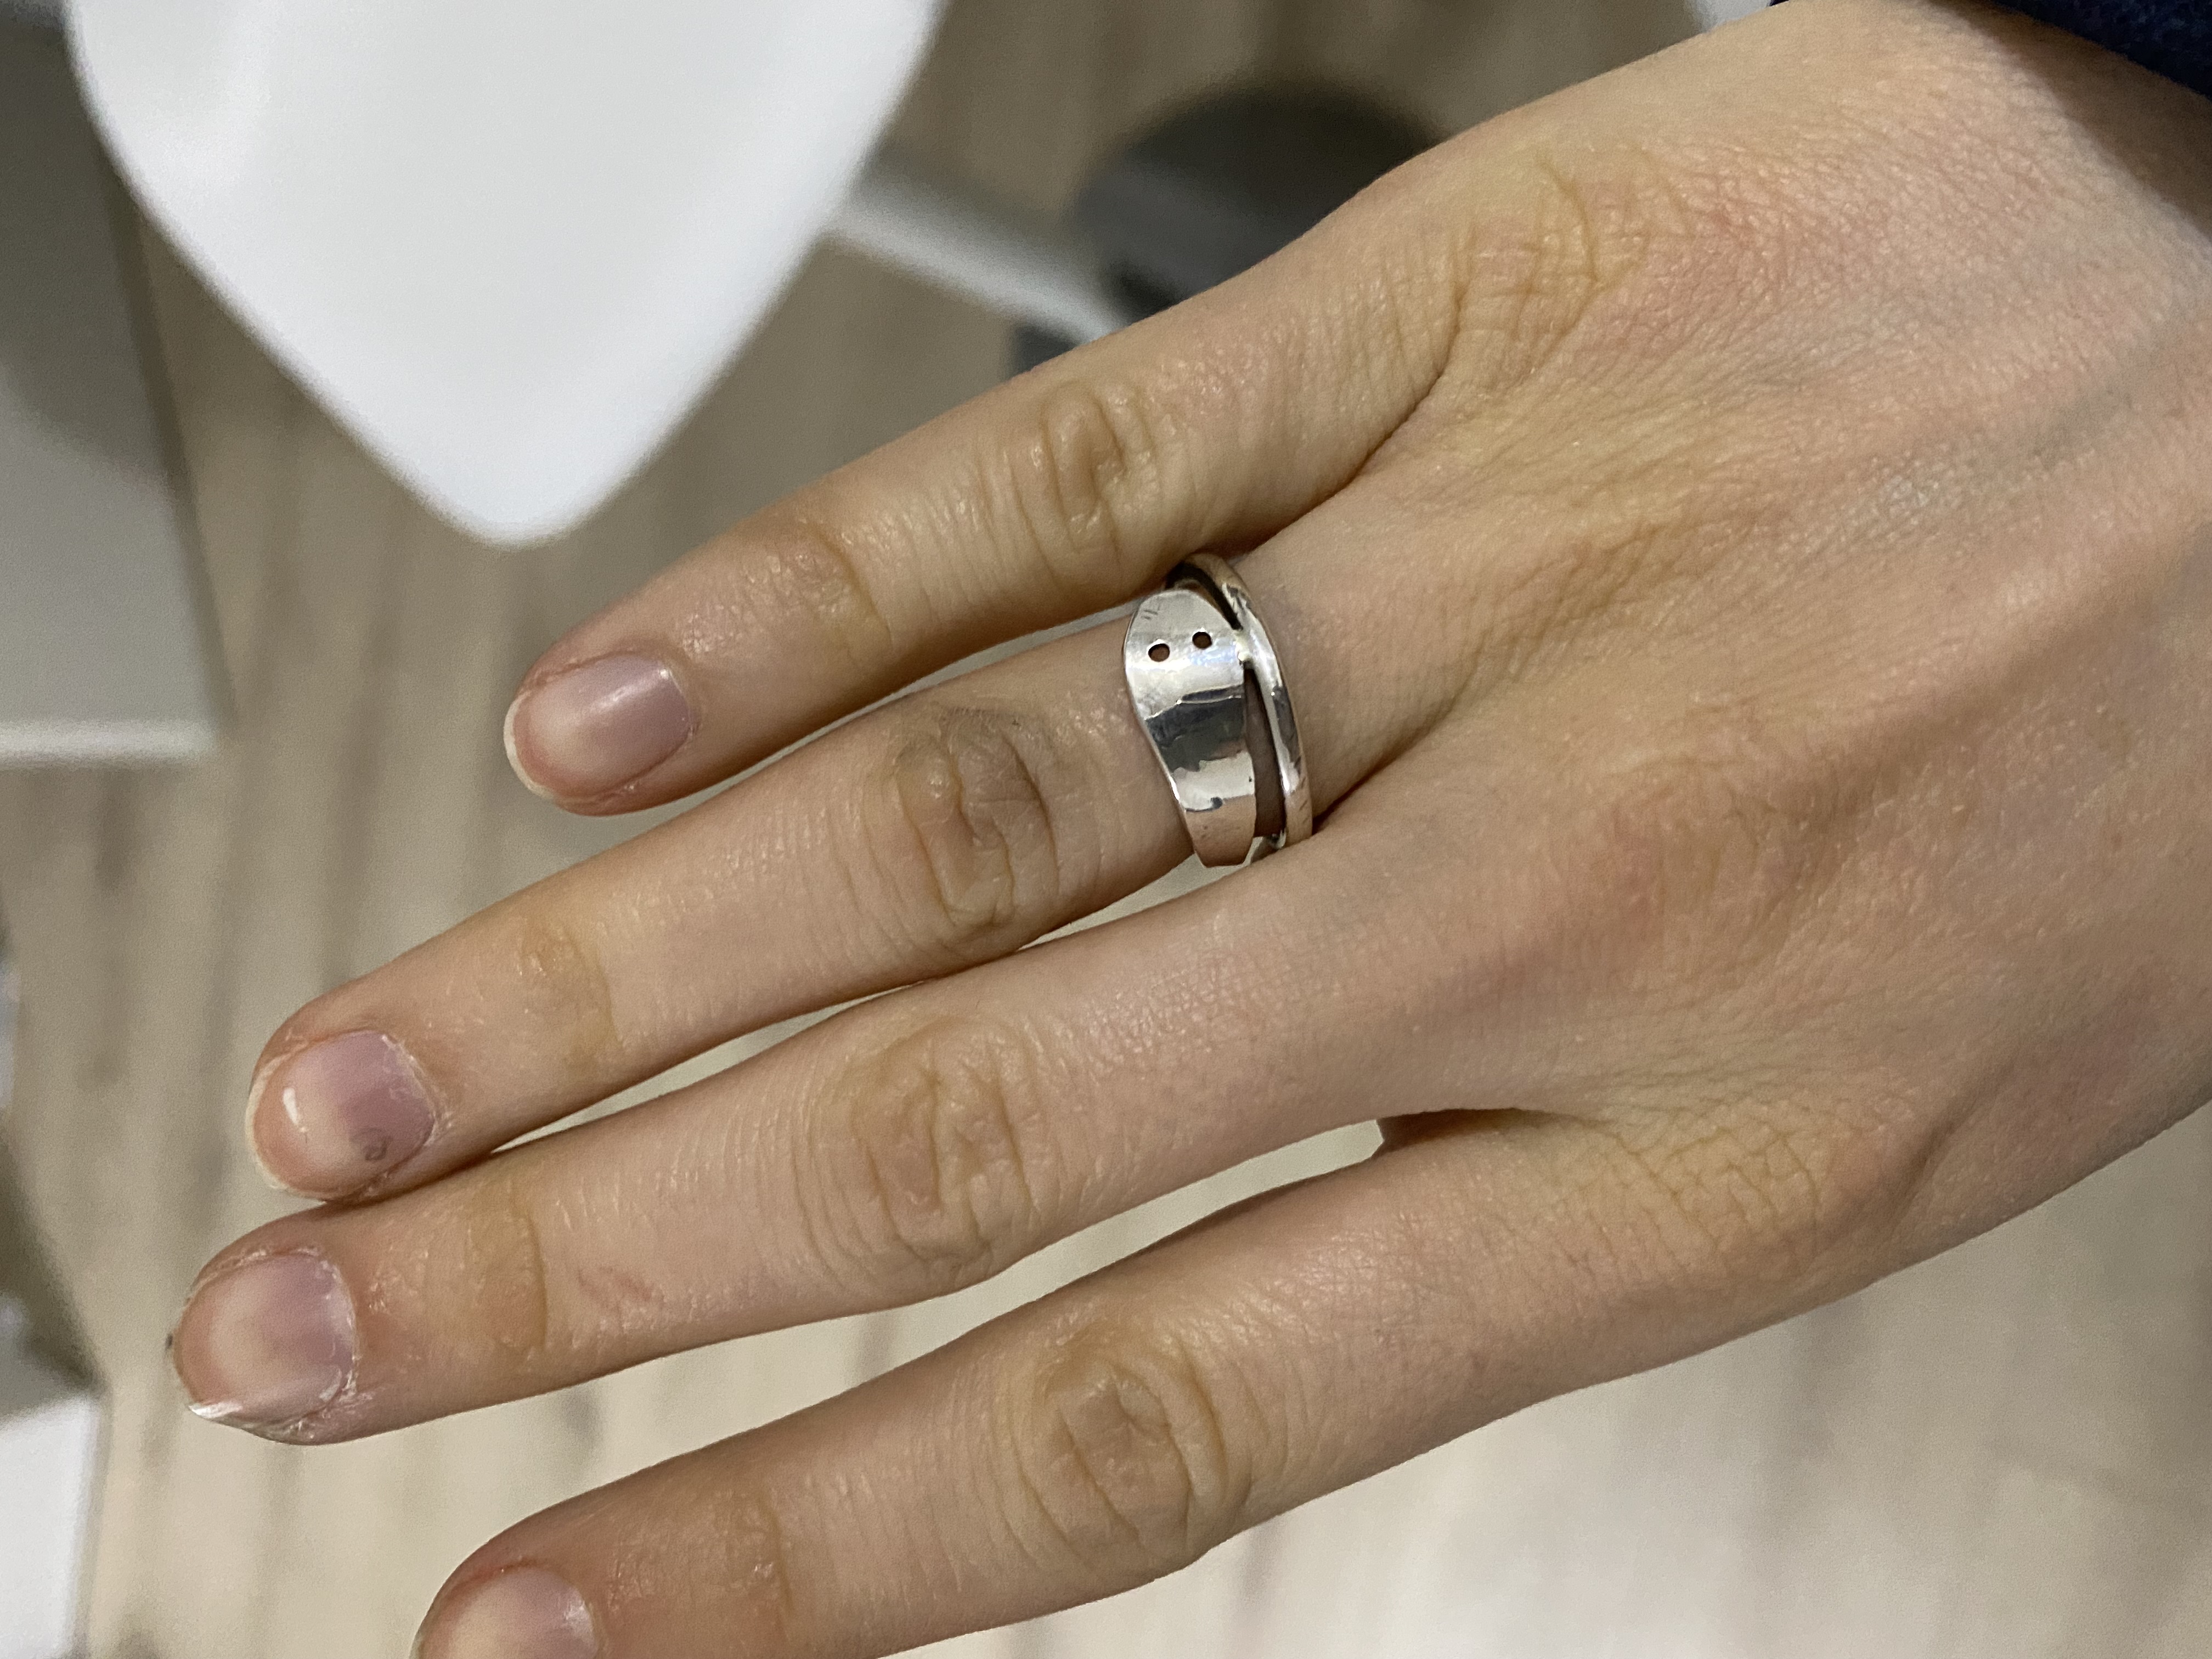 a ring that swirls around the finger like a snake. It has a wider end with two small holes, resembling the snake`s head and eyes